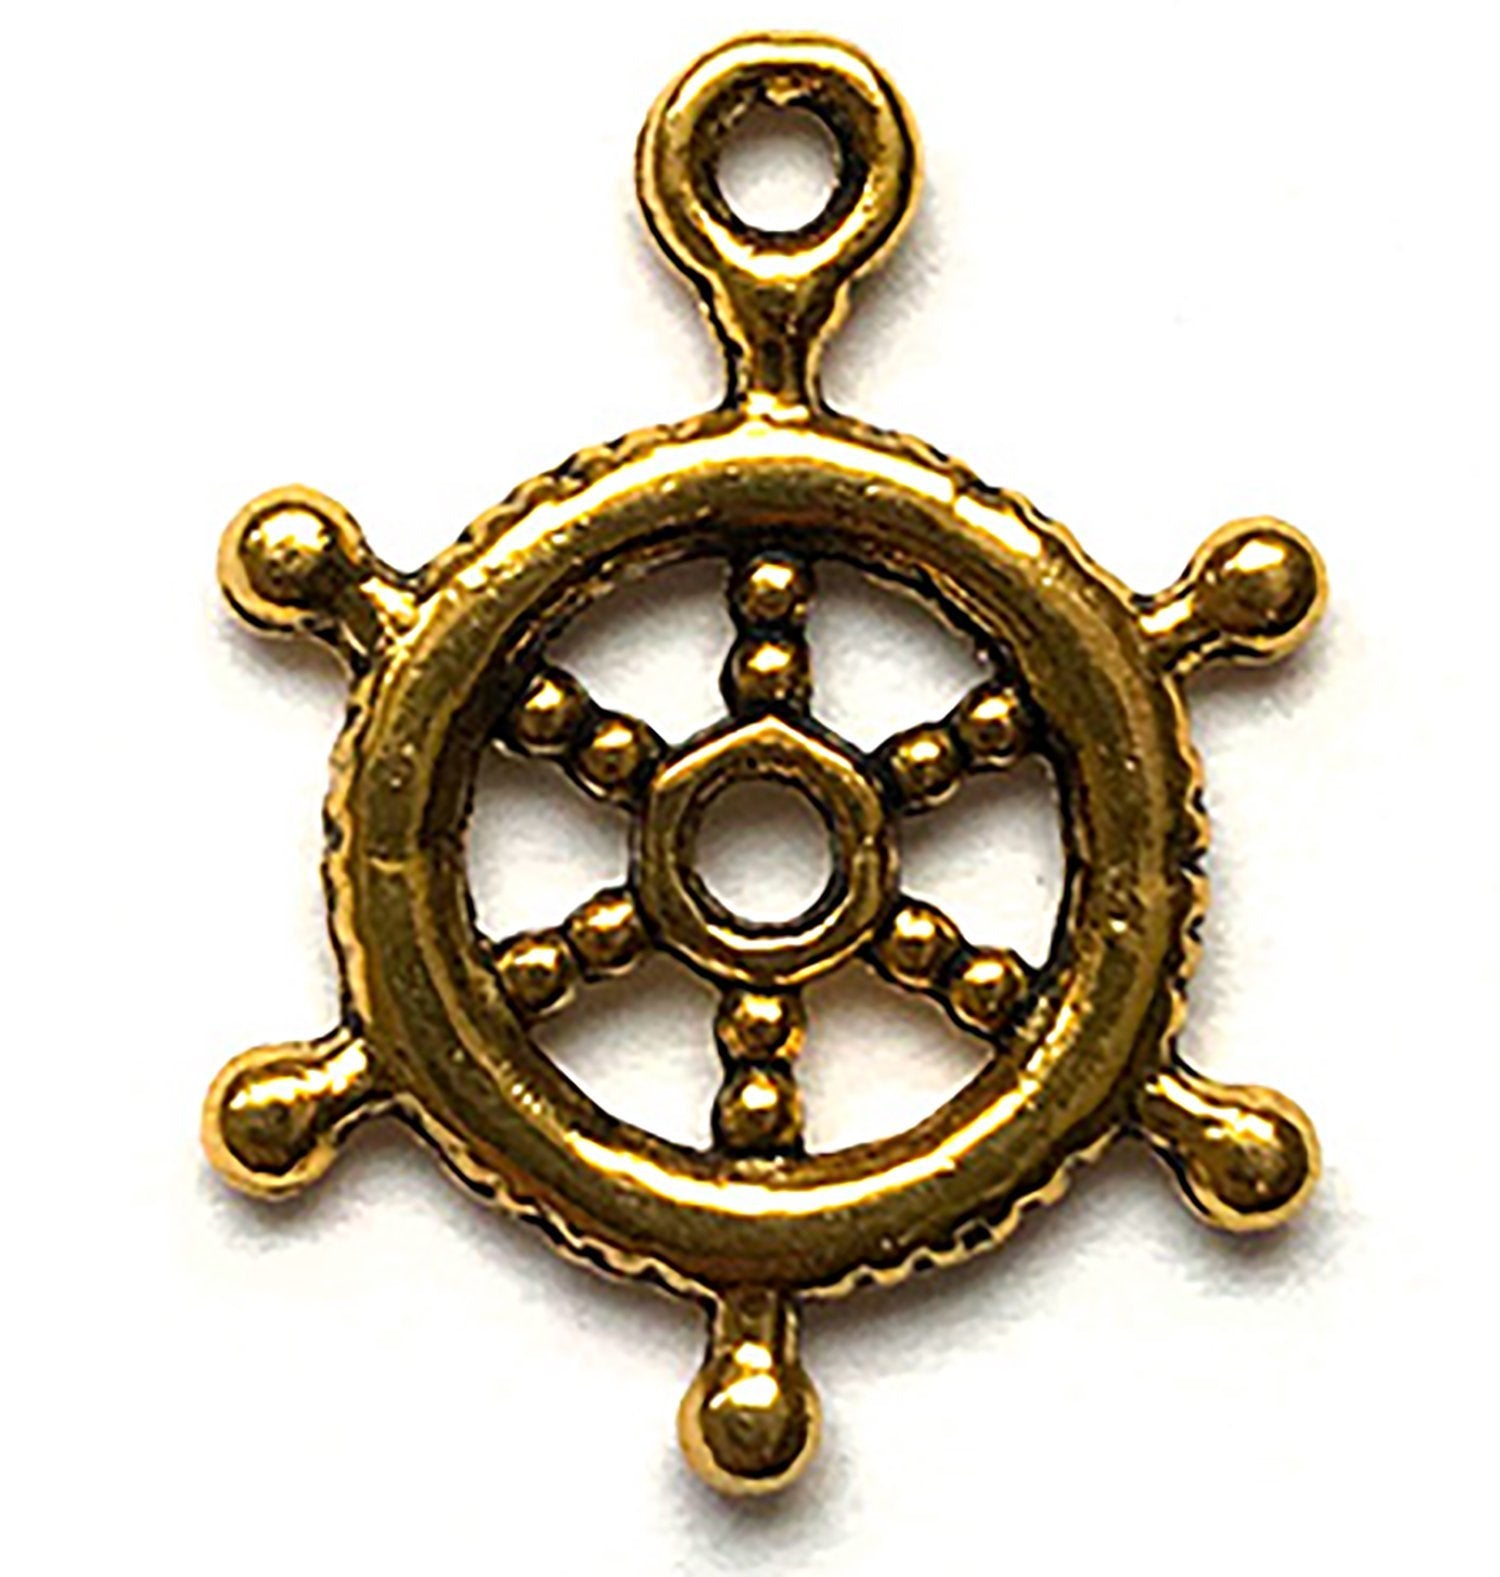 Ship Wheel Charm - Buttons Galore and More